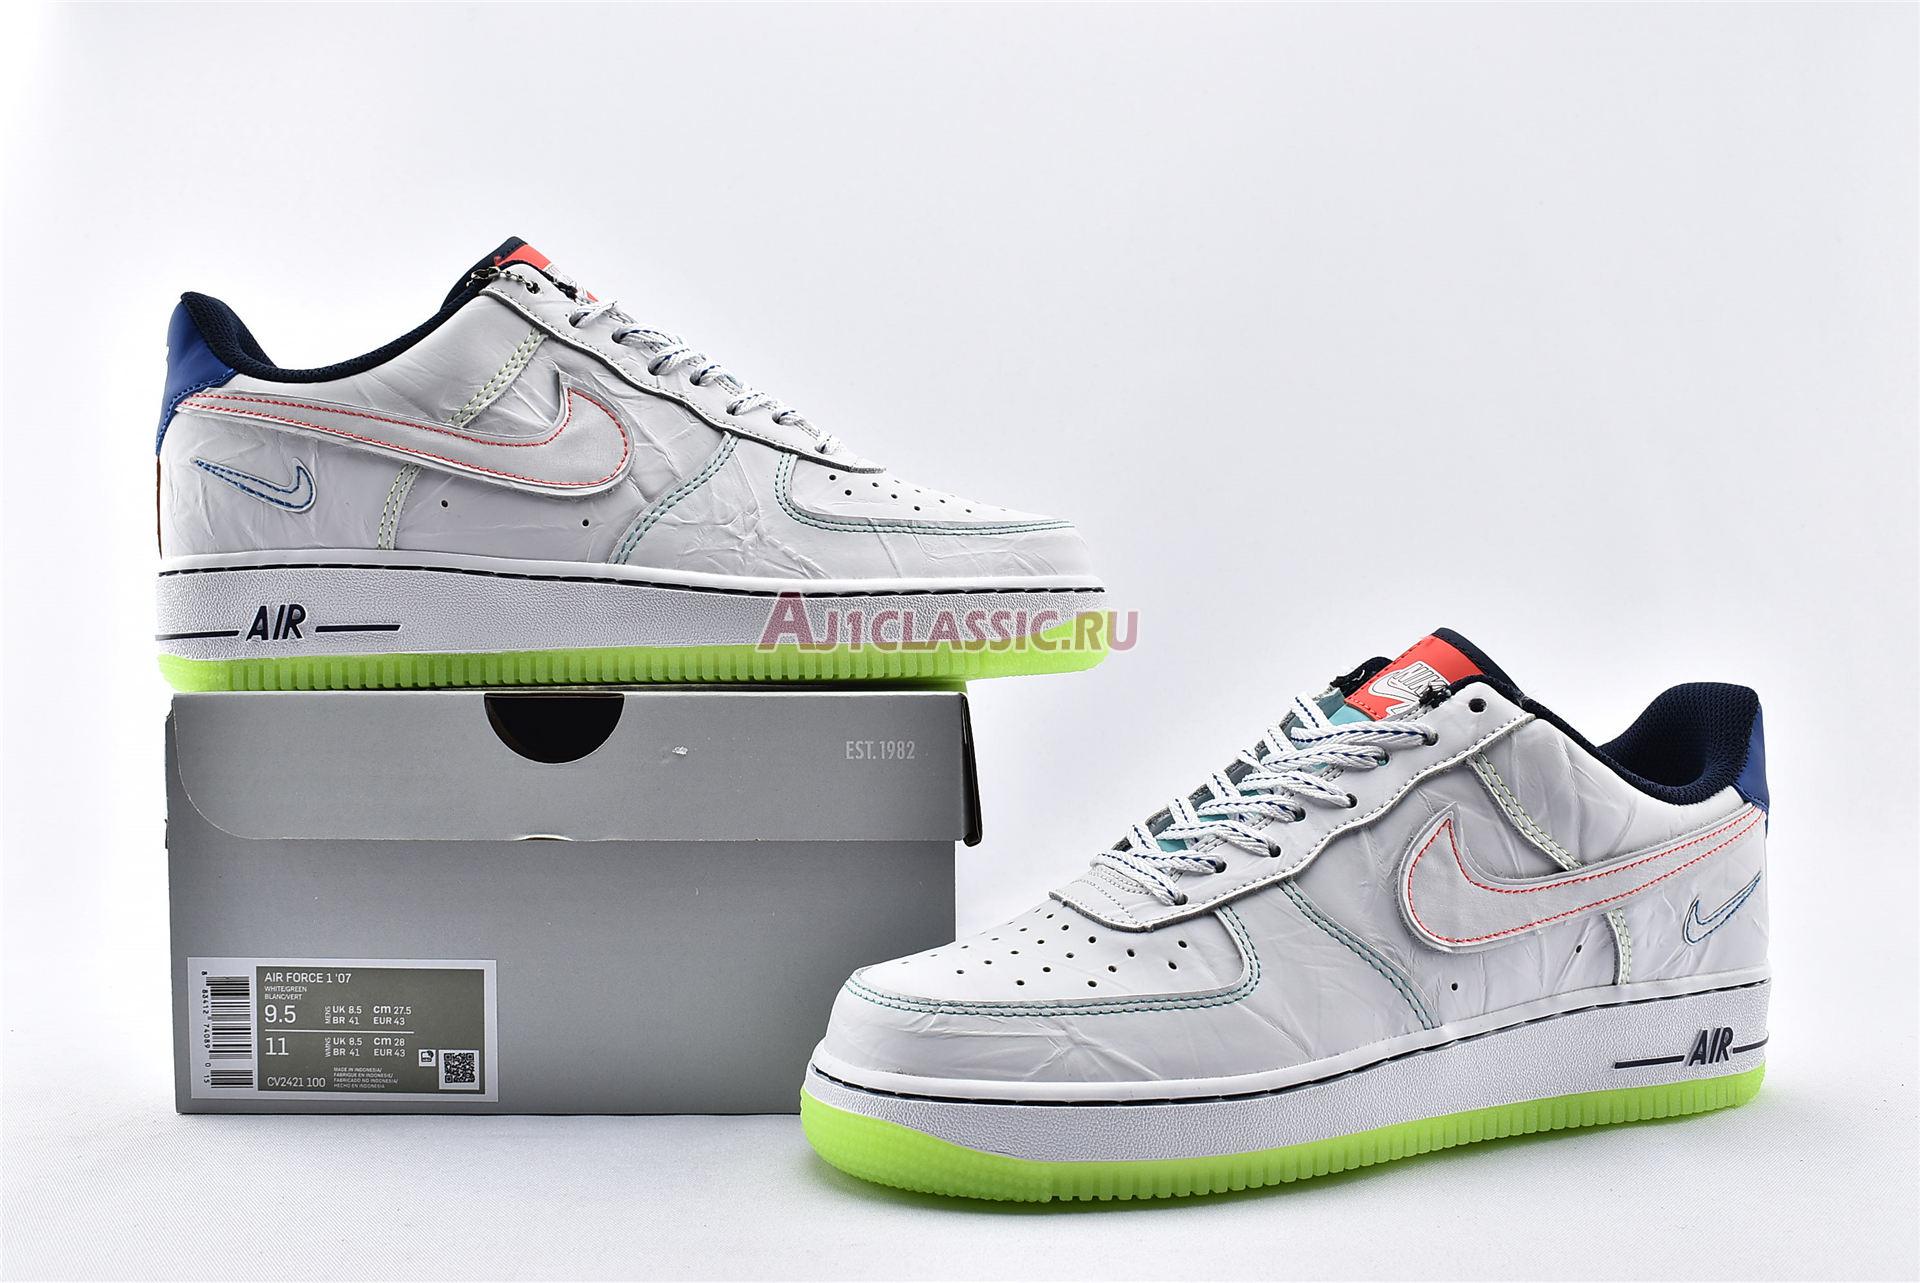 Nike Air Force 1 Low BG Outside the Lines CV2421-100 White/White/Racer Blue/Aurora Green Sneakers